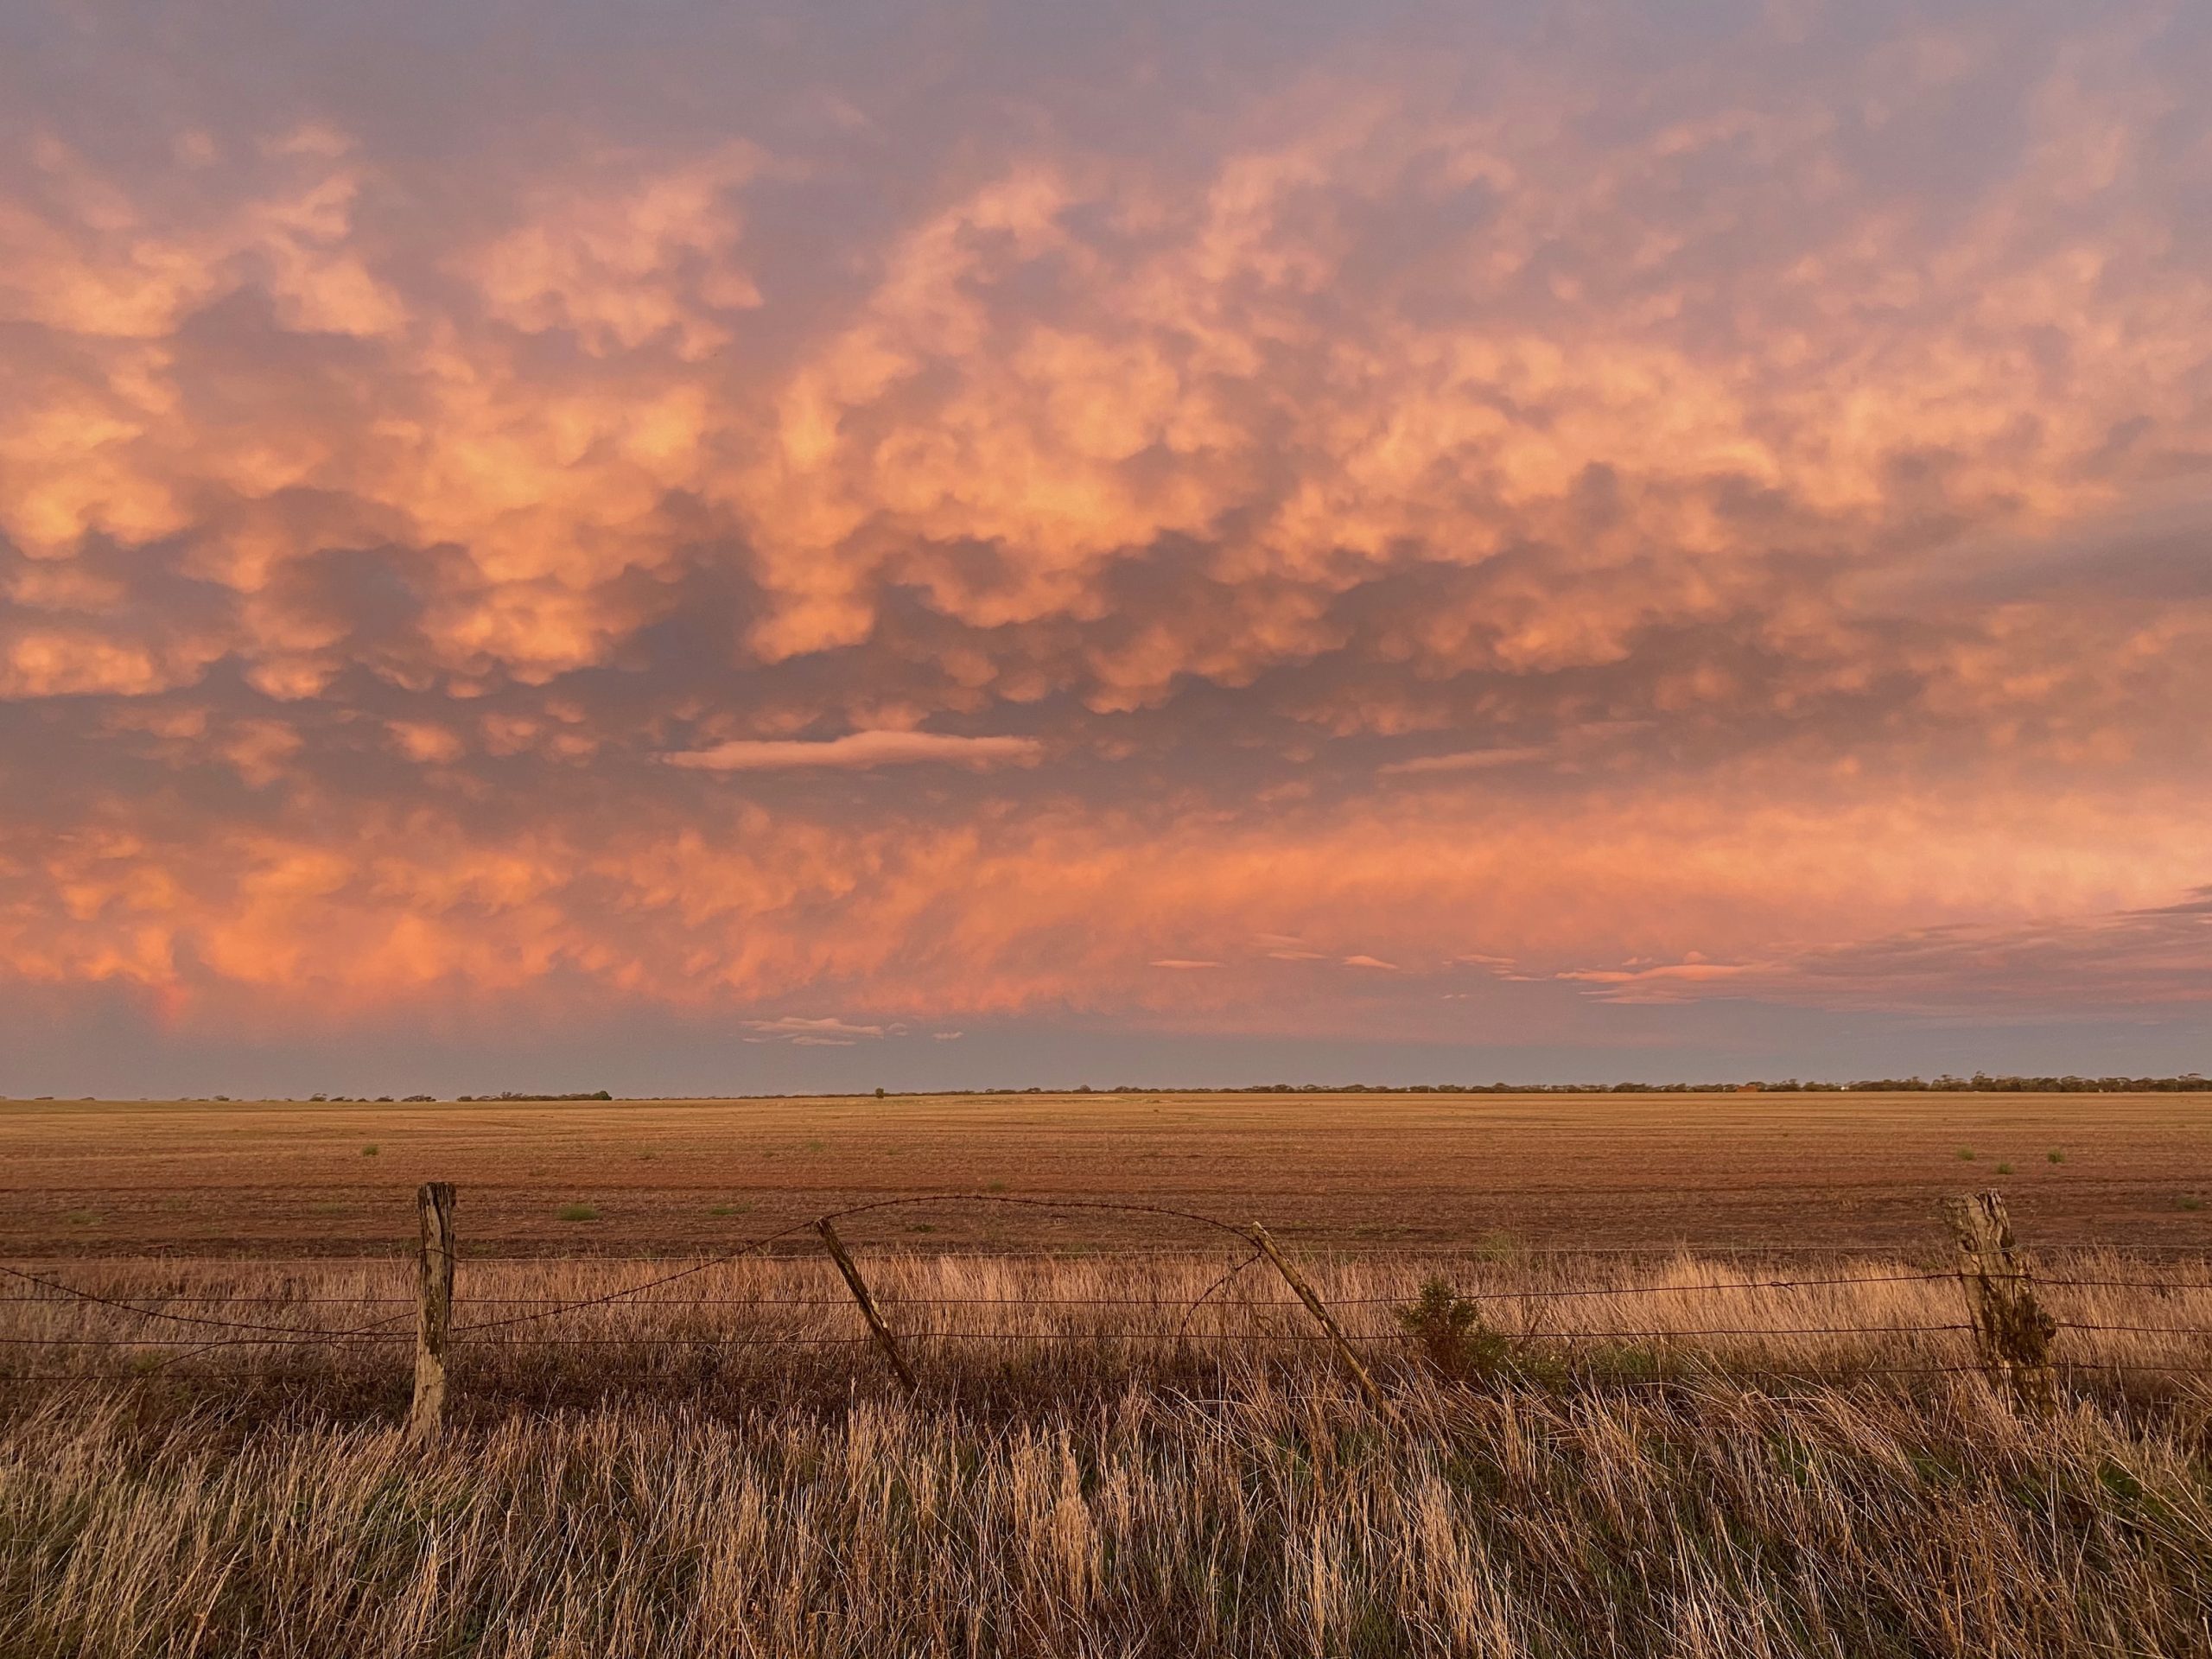 Building climate resilience into farming practices crucial for the Riverina’s future- experts